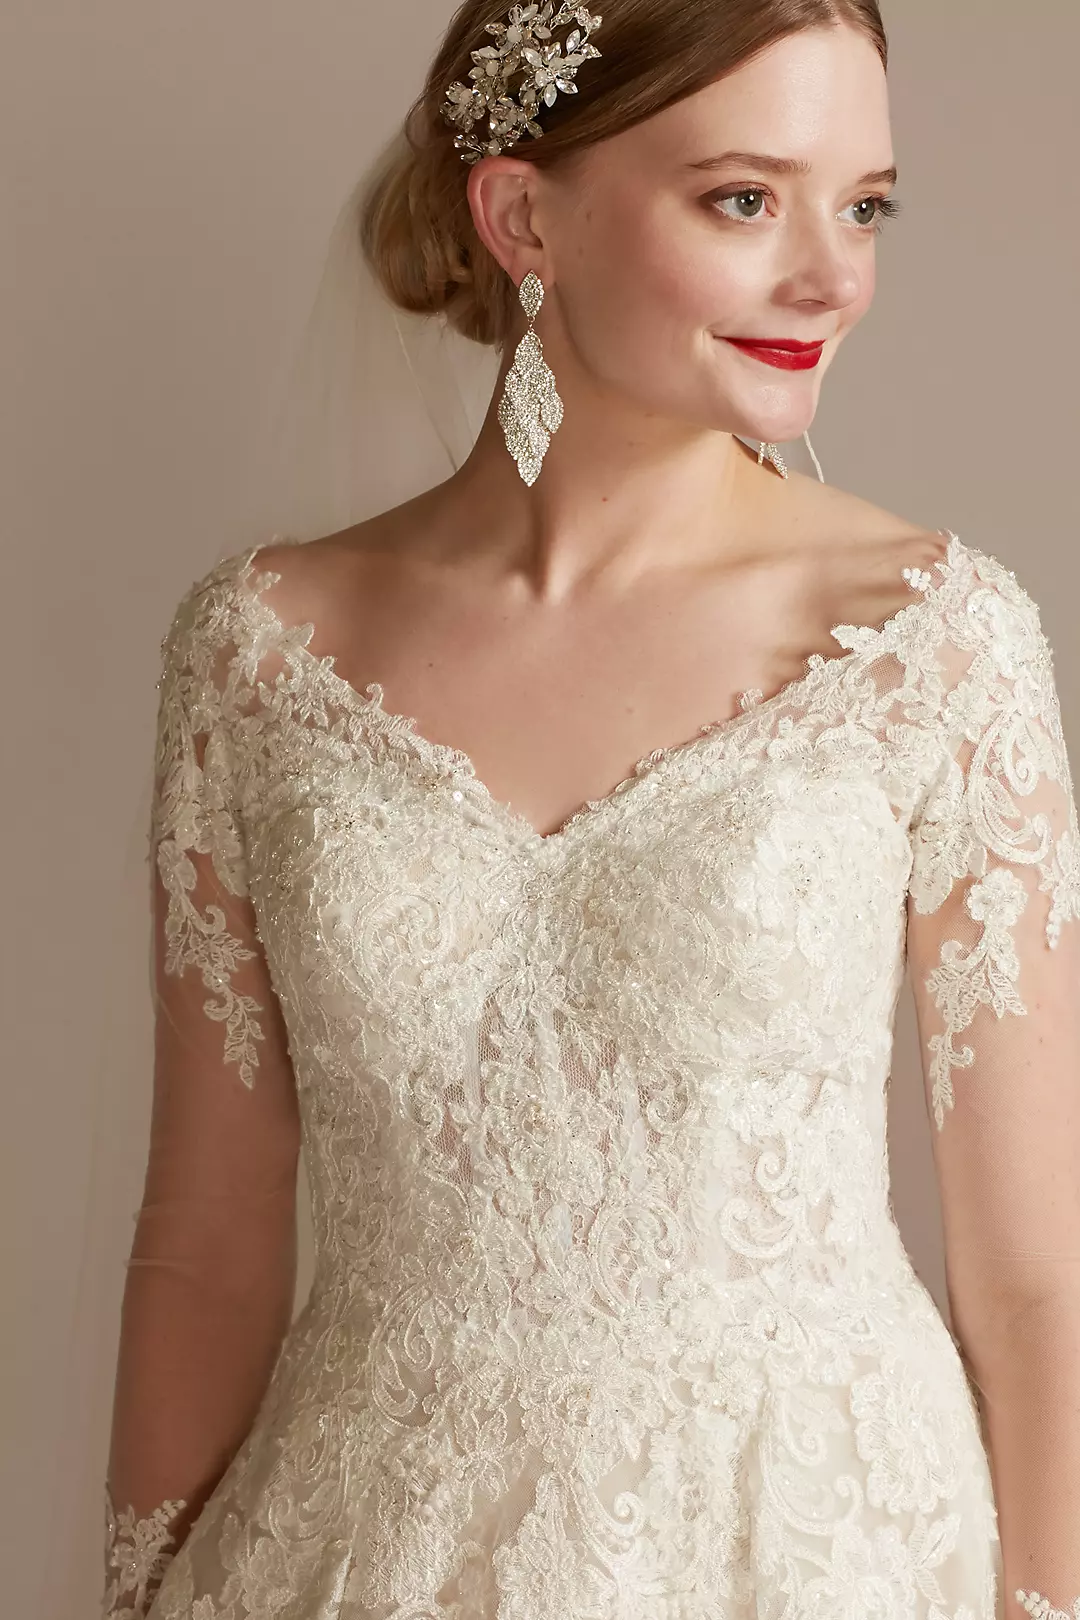 Lace and Tulle Long Sleeve Ball Gown Wedding Dress Image 3